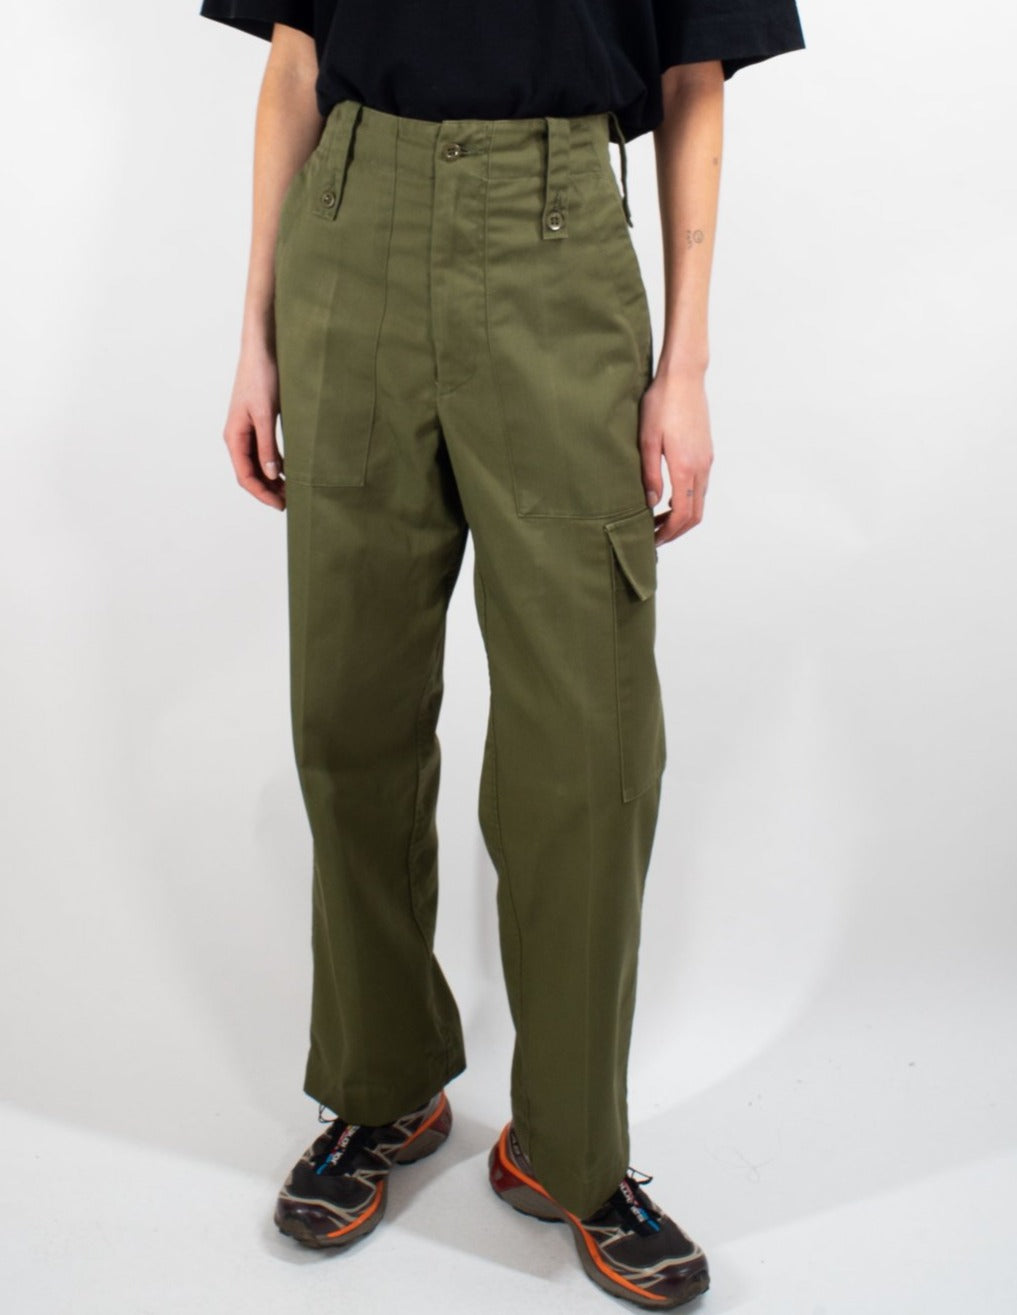 British Army Lightweight Olive Green Trousers - Forces Uniform and Kit